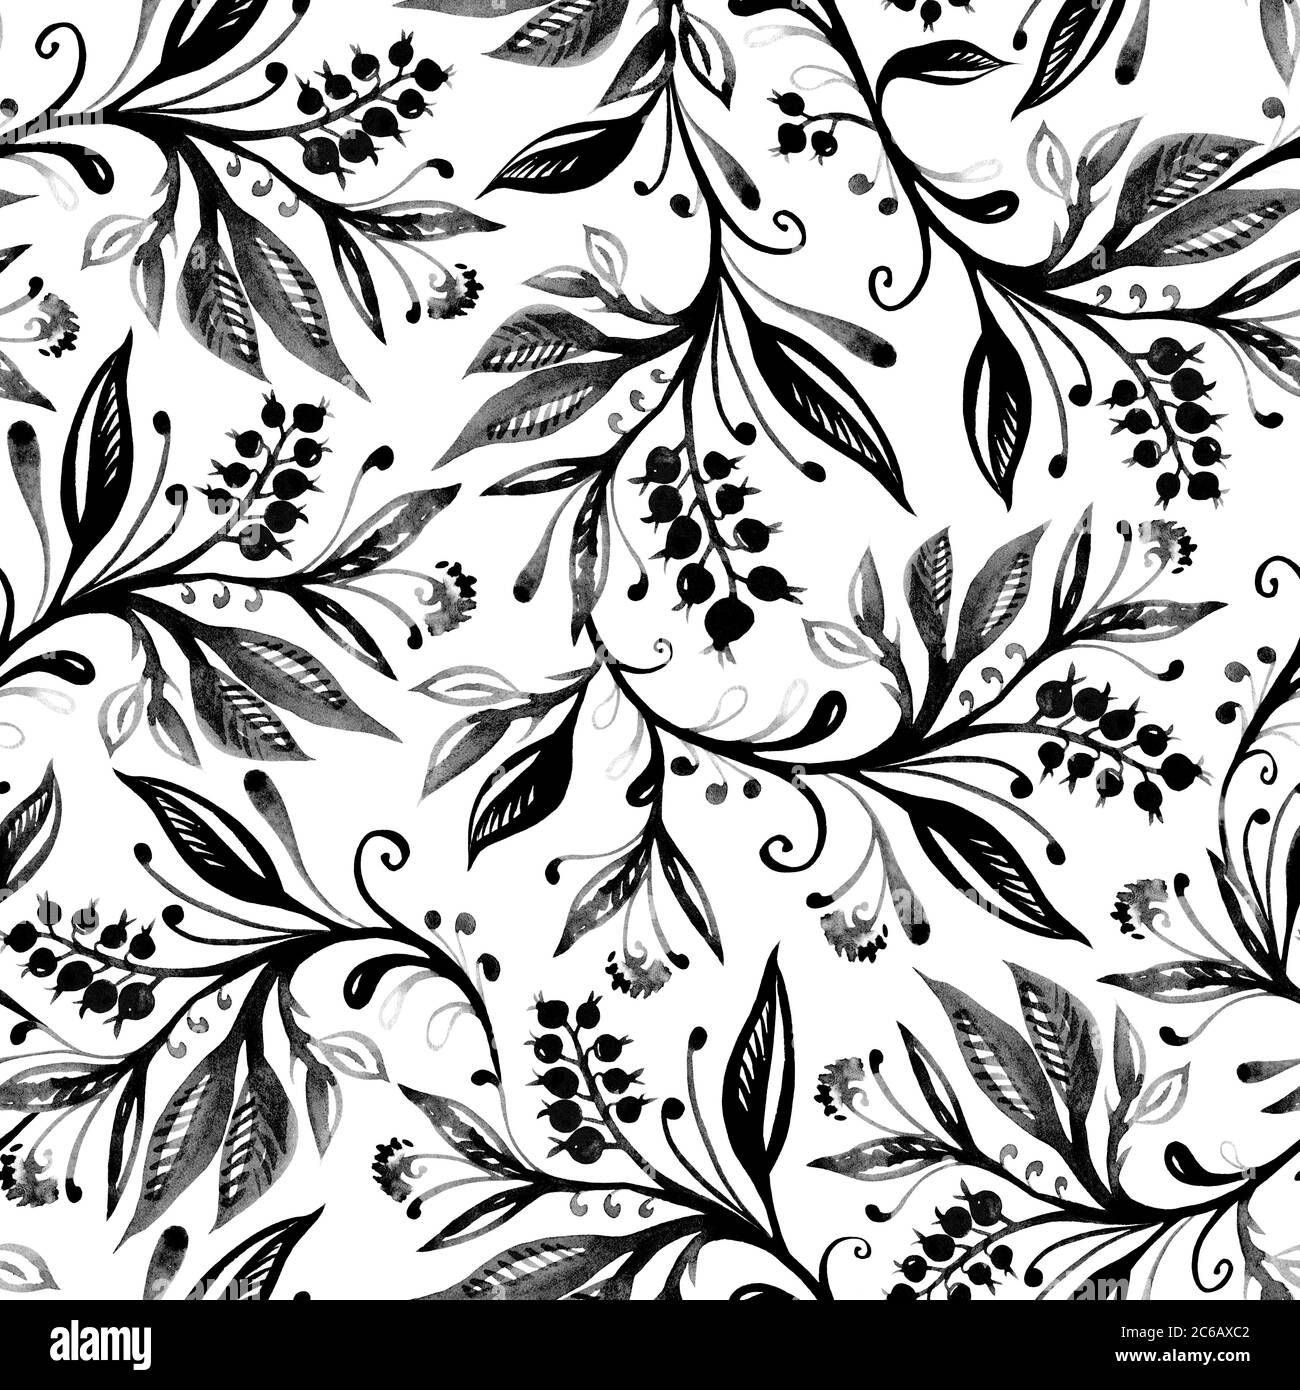 Floral seamless pattern with leaves and berries in grayscale.  Stock Photo